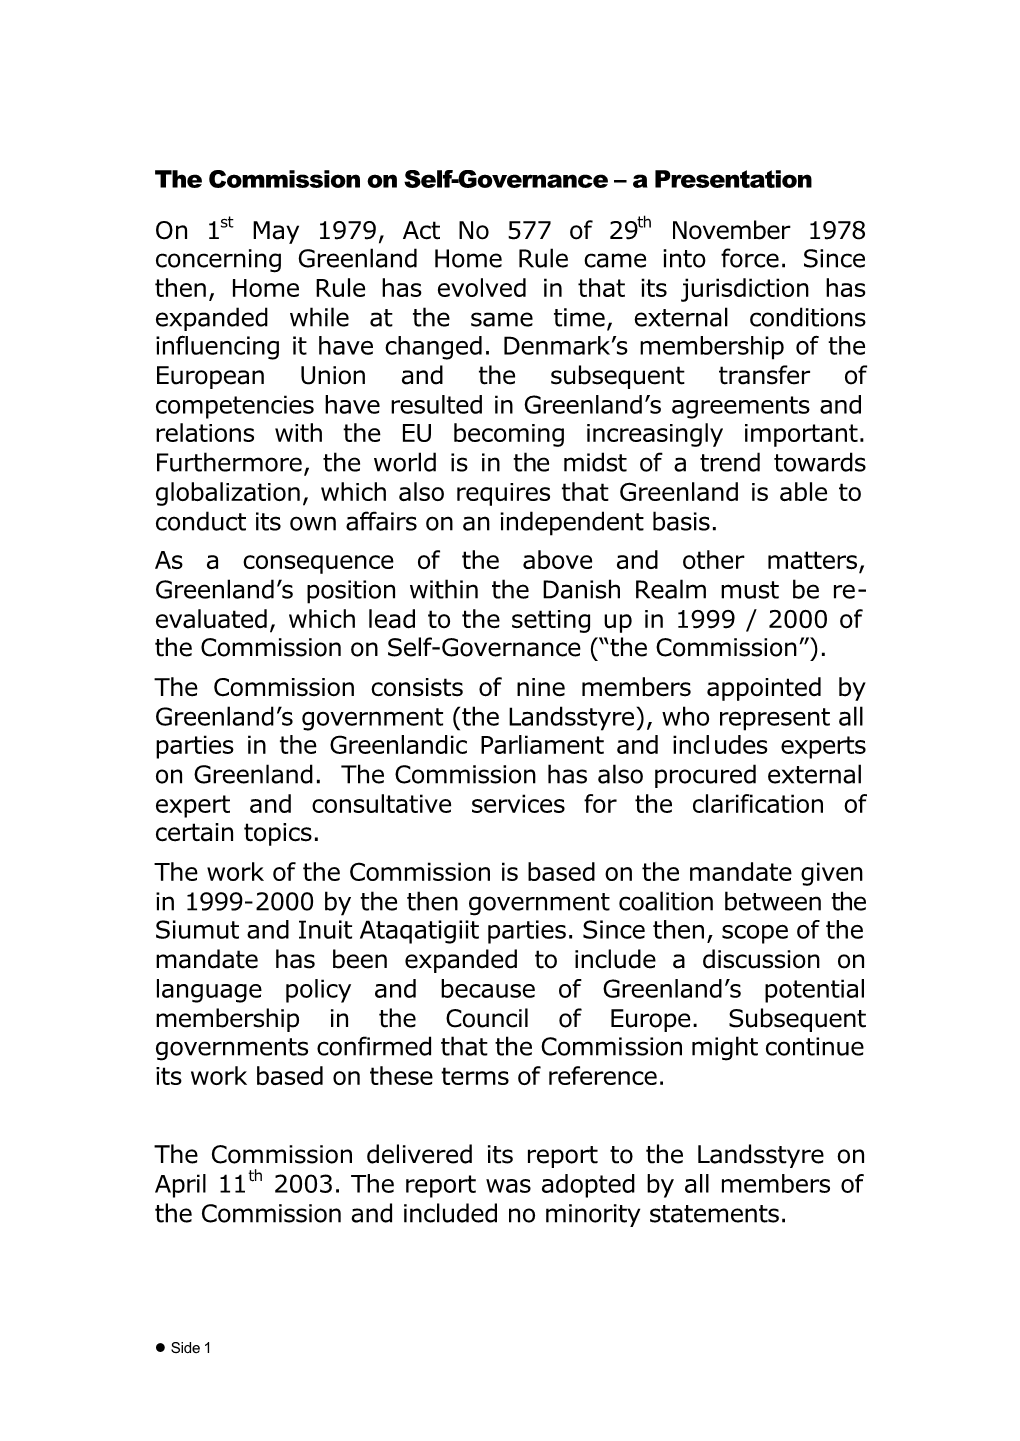 The Commission on Self-Governance – a Presentation on 1St May 1979, Act No 577 of 29Th November 1978 Concerning Greenland Home